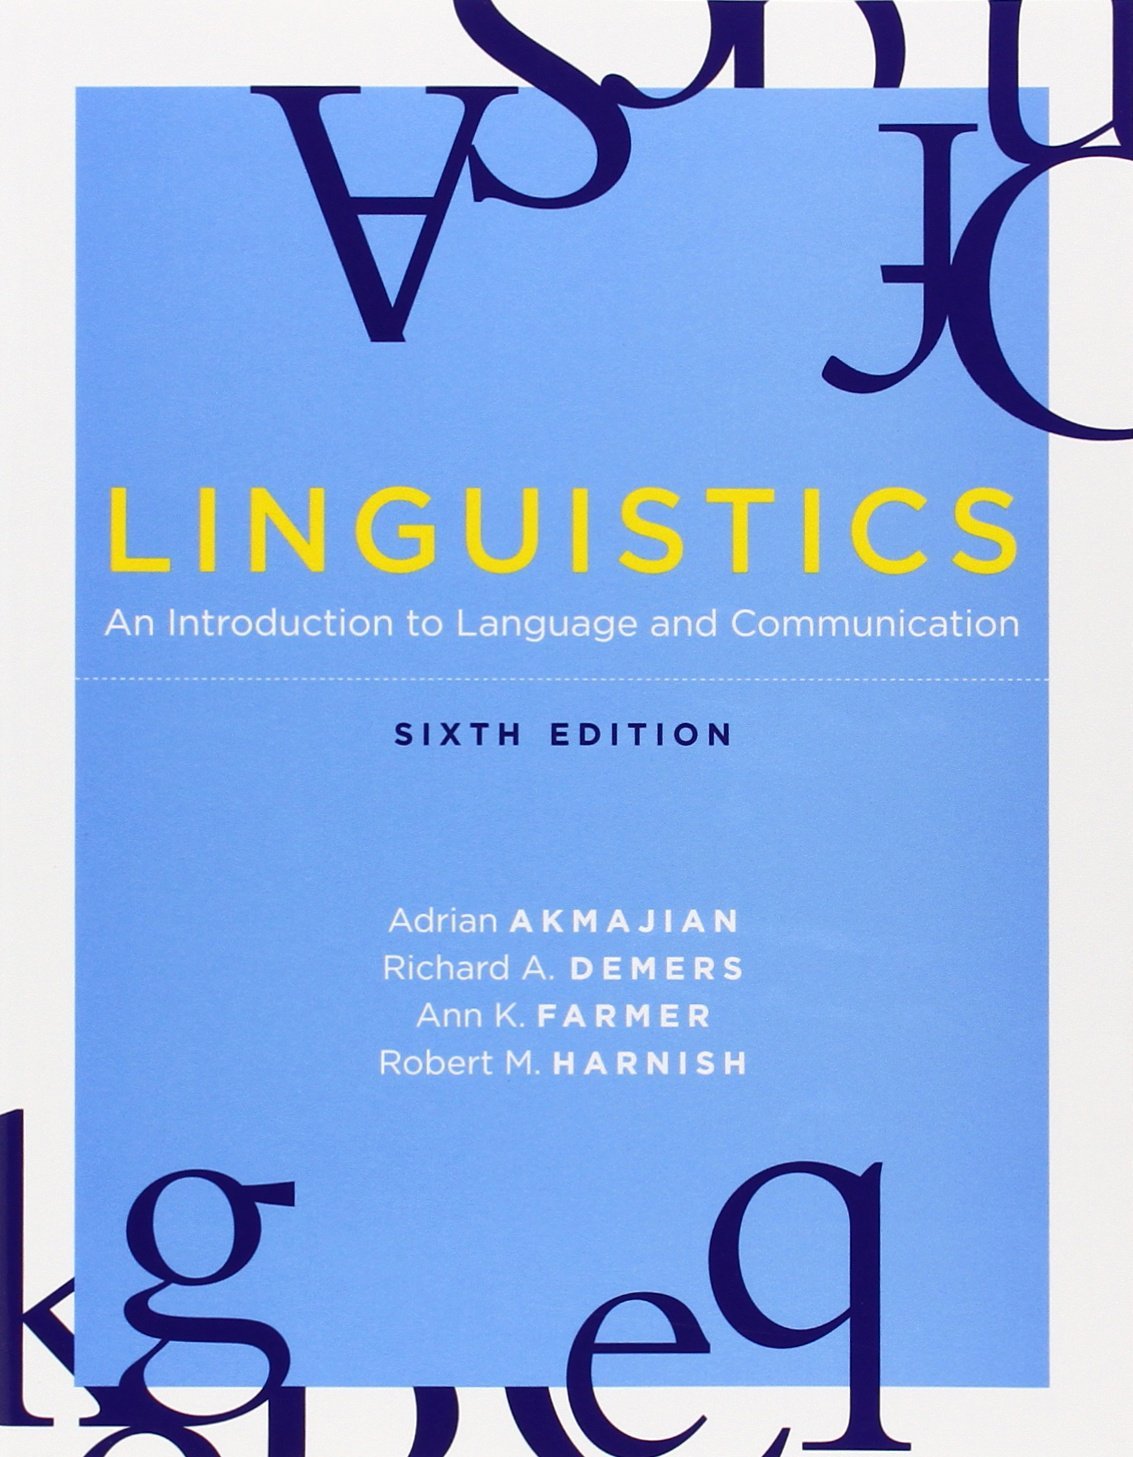 Linguistics: An Introduction to Language and Communication, 6th edition